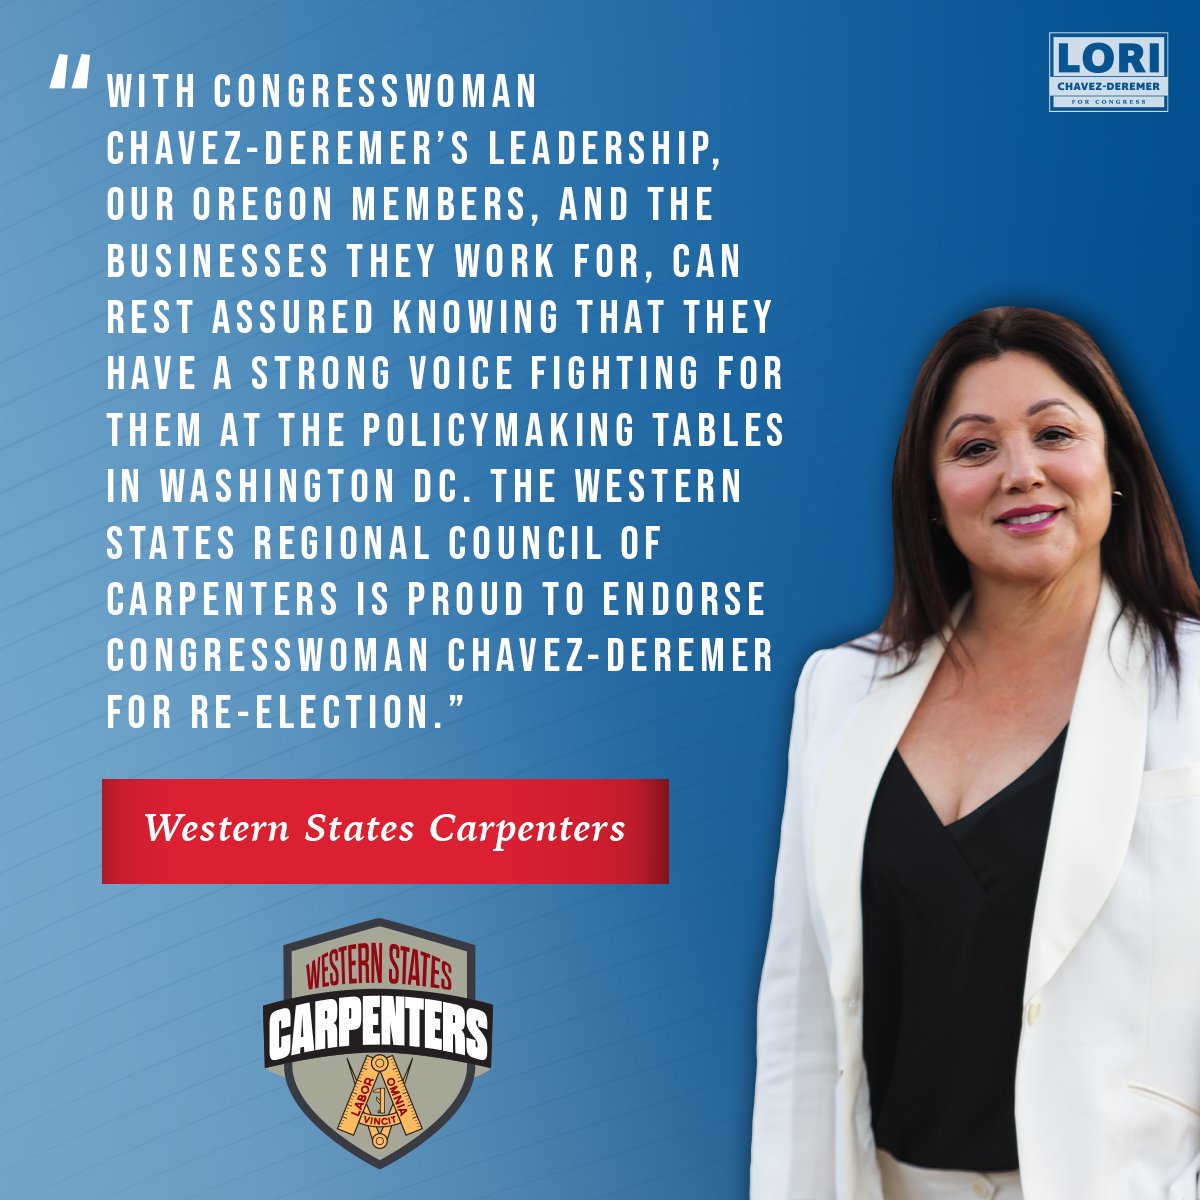 Thank you, Western States Carpenters for your endorsement! Empowering Oregon’s workforce is one of my top priorities and you can count on me to continue fighting for fair wages, accessible apprenticeships, and safe working conditions.